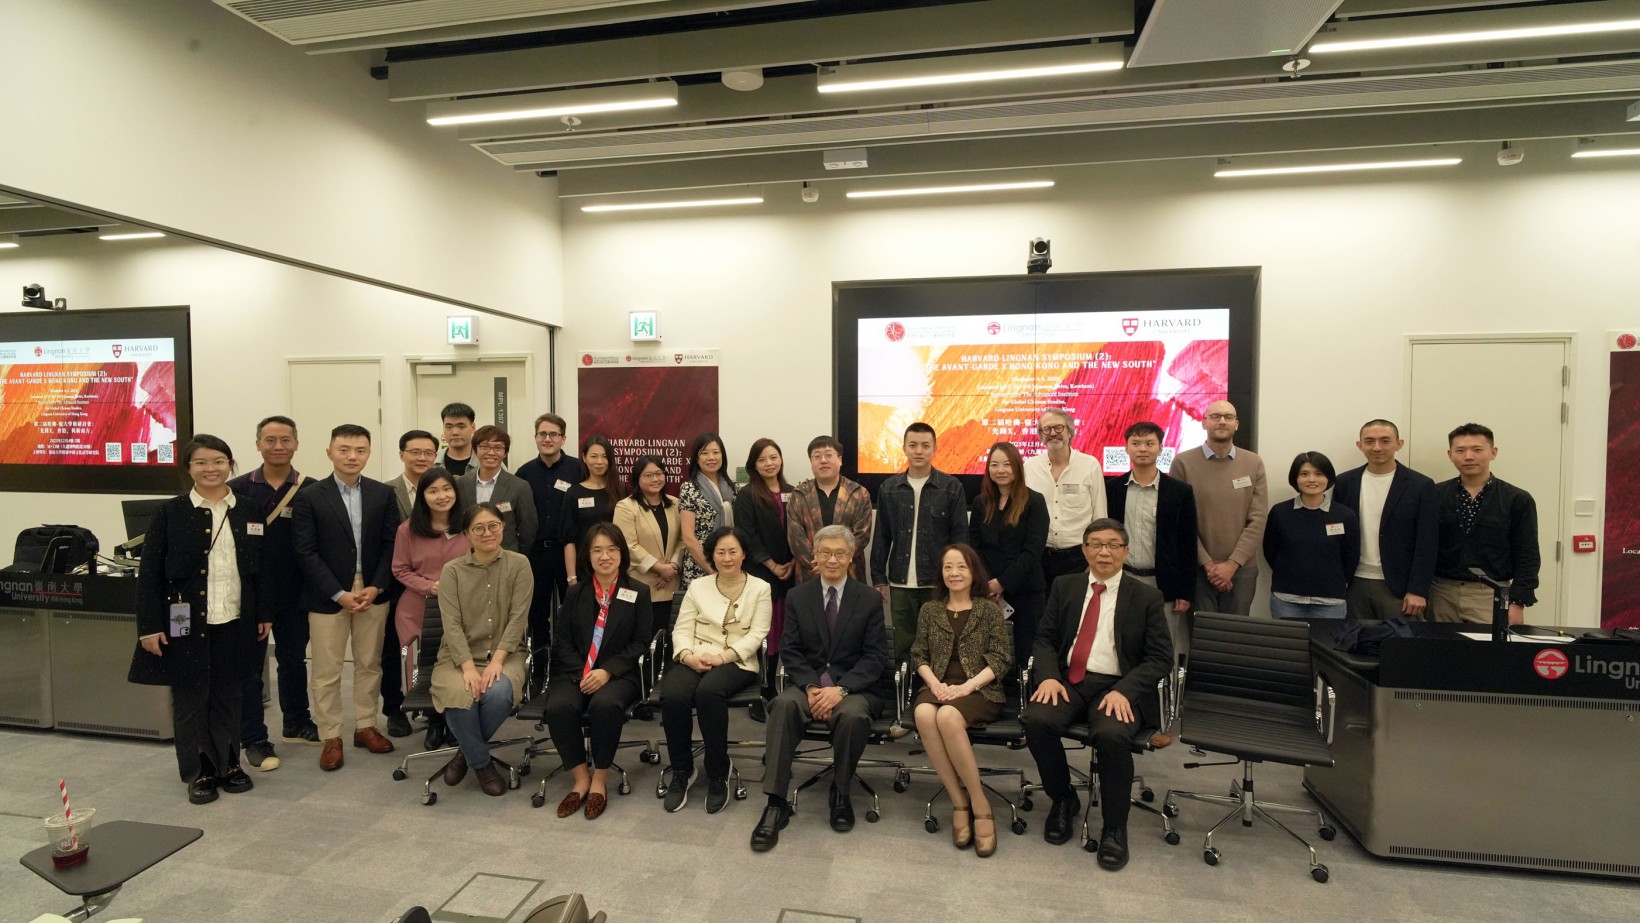 Lingnan University and Harvard University jointly host the second Harvard-Lingnan Symposium: “The Avant-Garde X Hong Kong and the New South”.